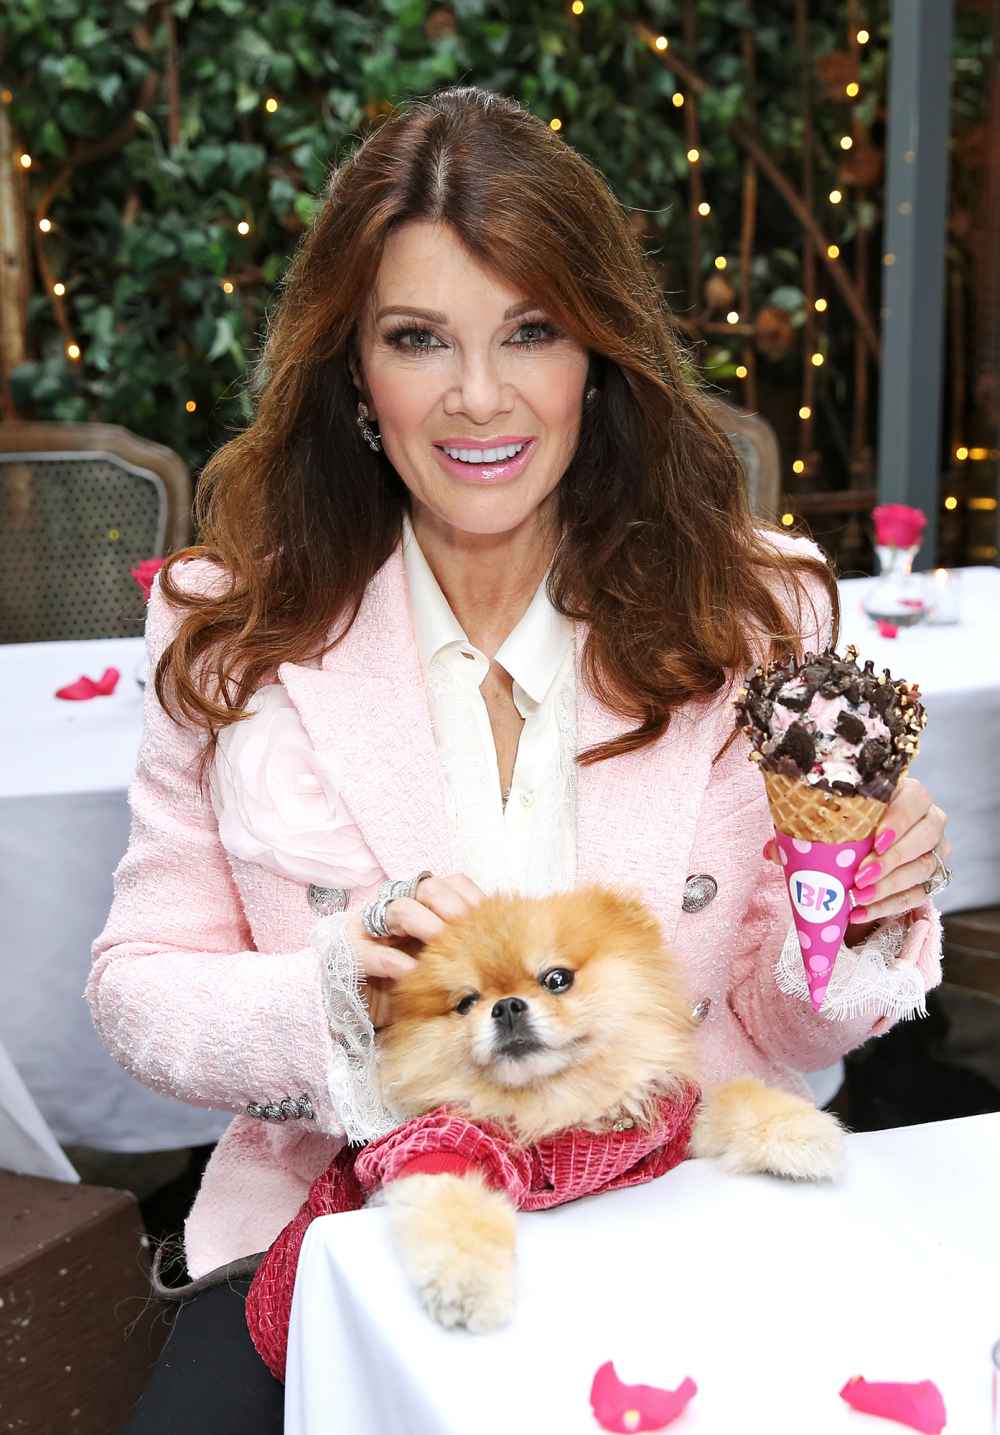 Lisa Vanderpump Saw Kyle Richards for the First Time Since Showdown